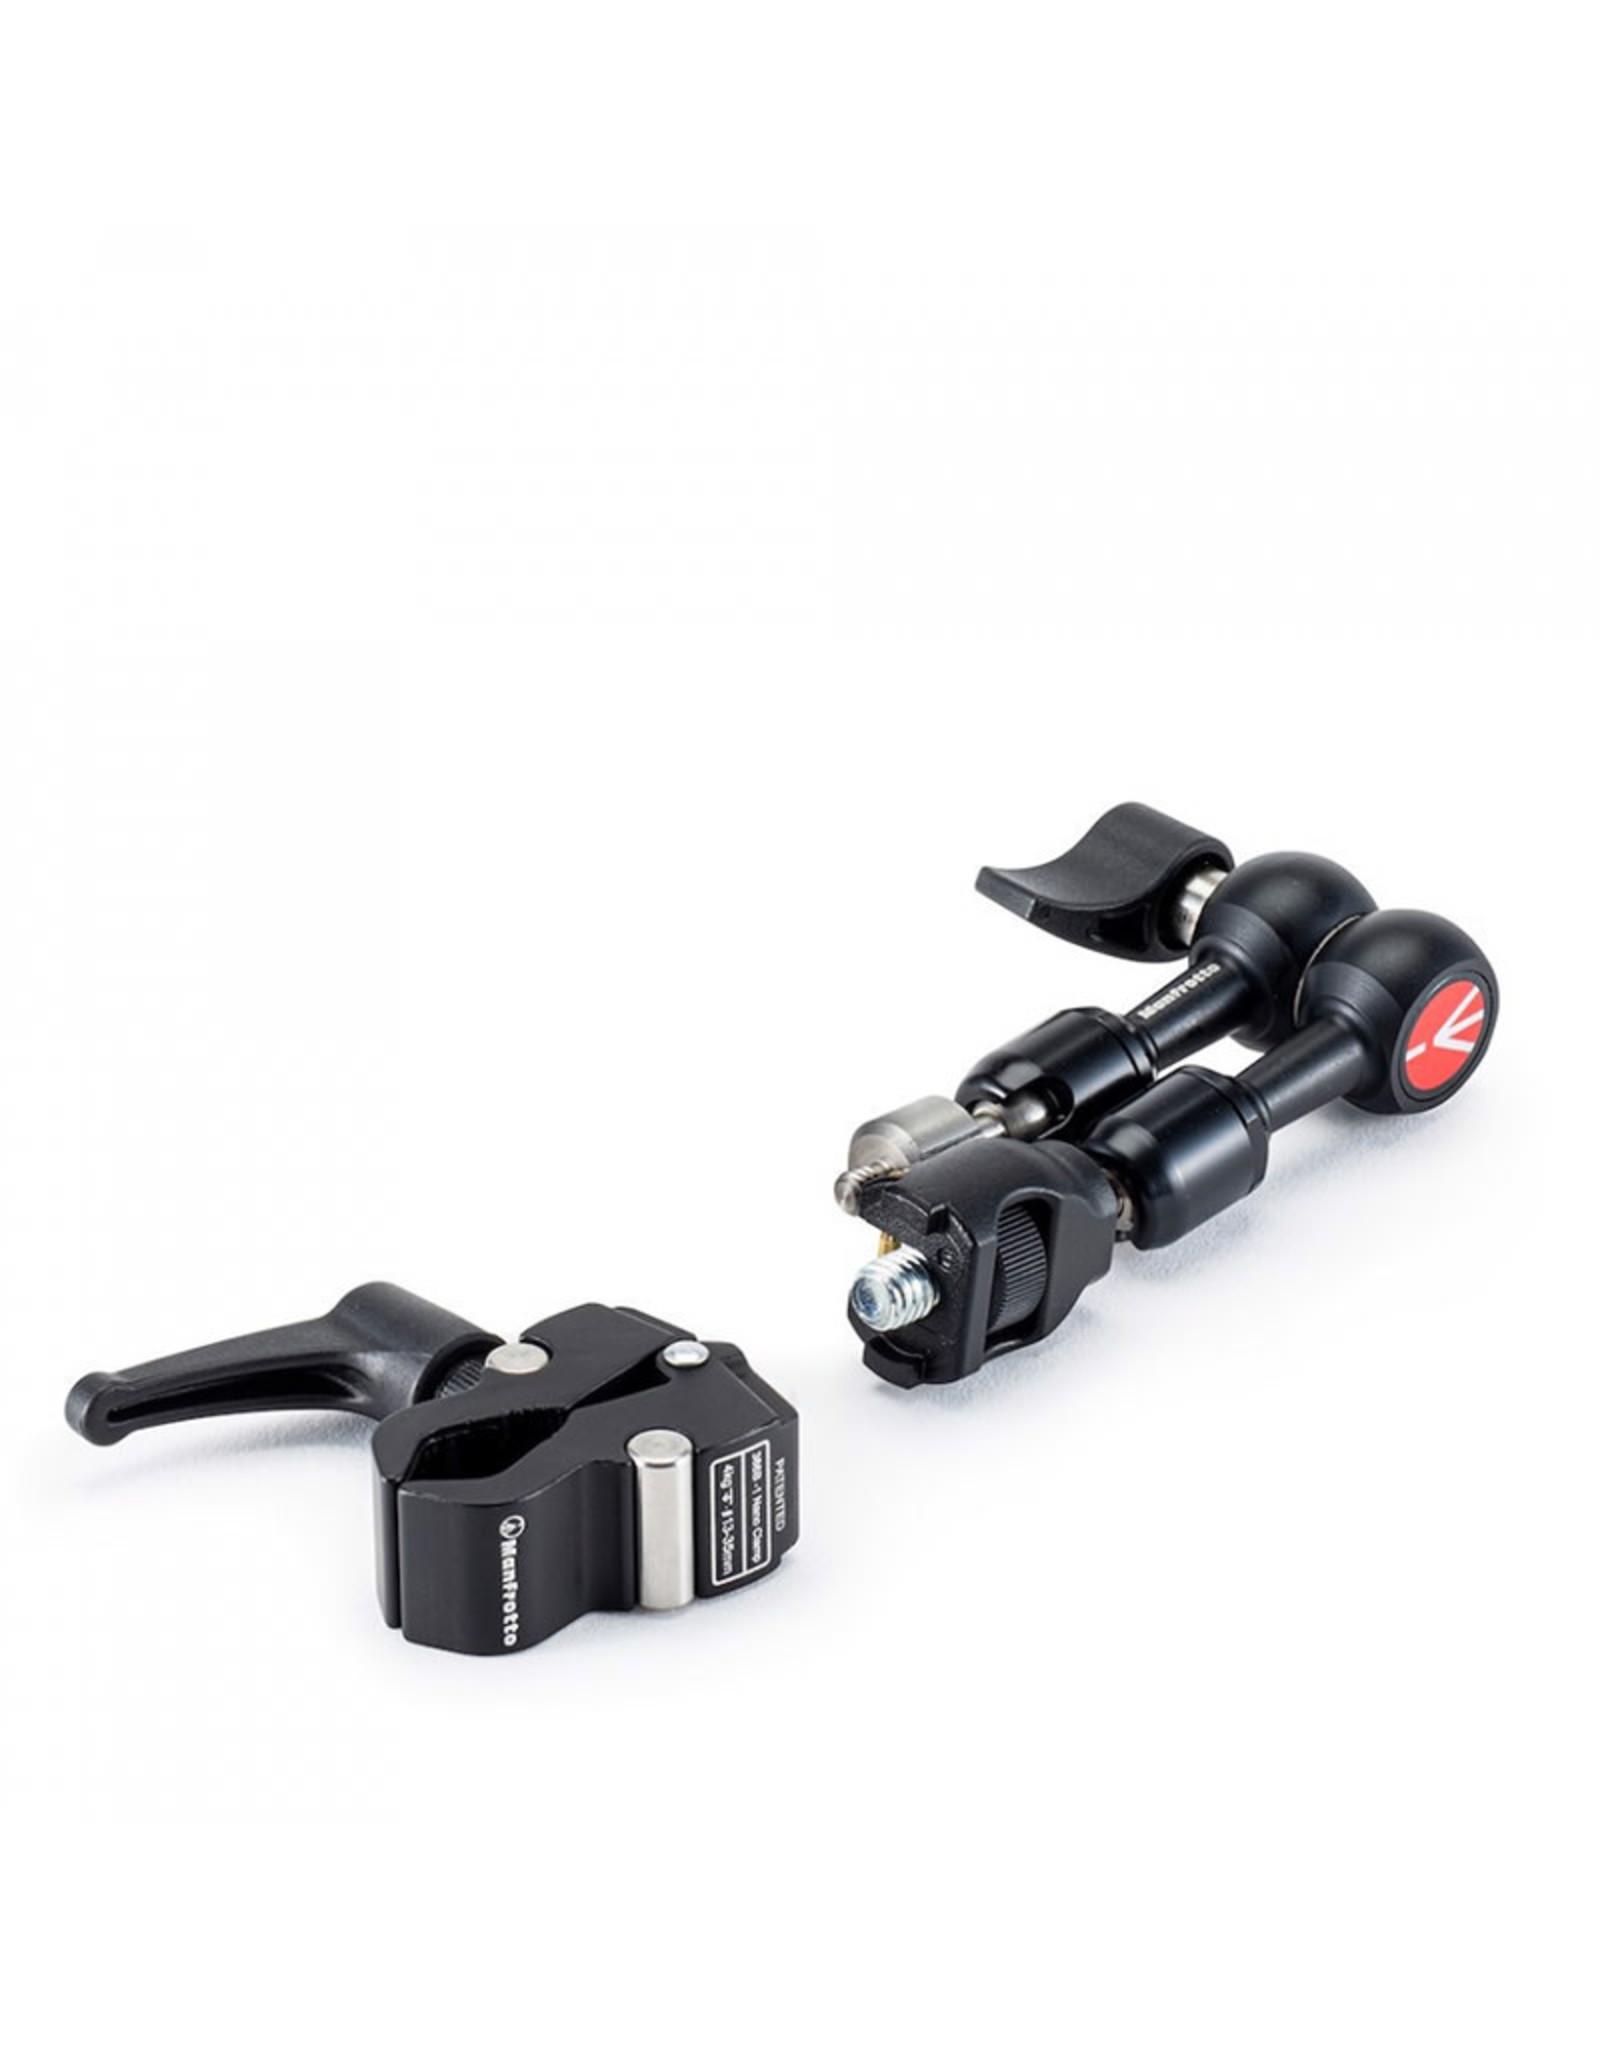 Manfrotto Manfrotto 244MICROKIT MICRO FRICTION ARM KIT w/ ANTI-ROTATION & 1/4" ATTACHMENTS + 386B NANO CLAMP